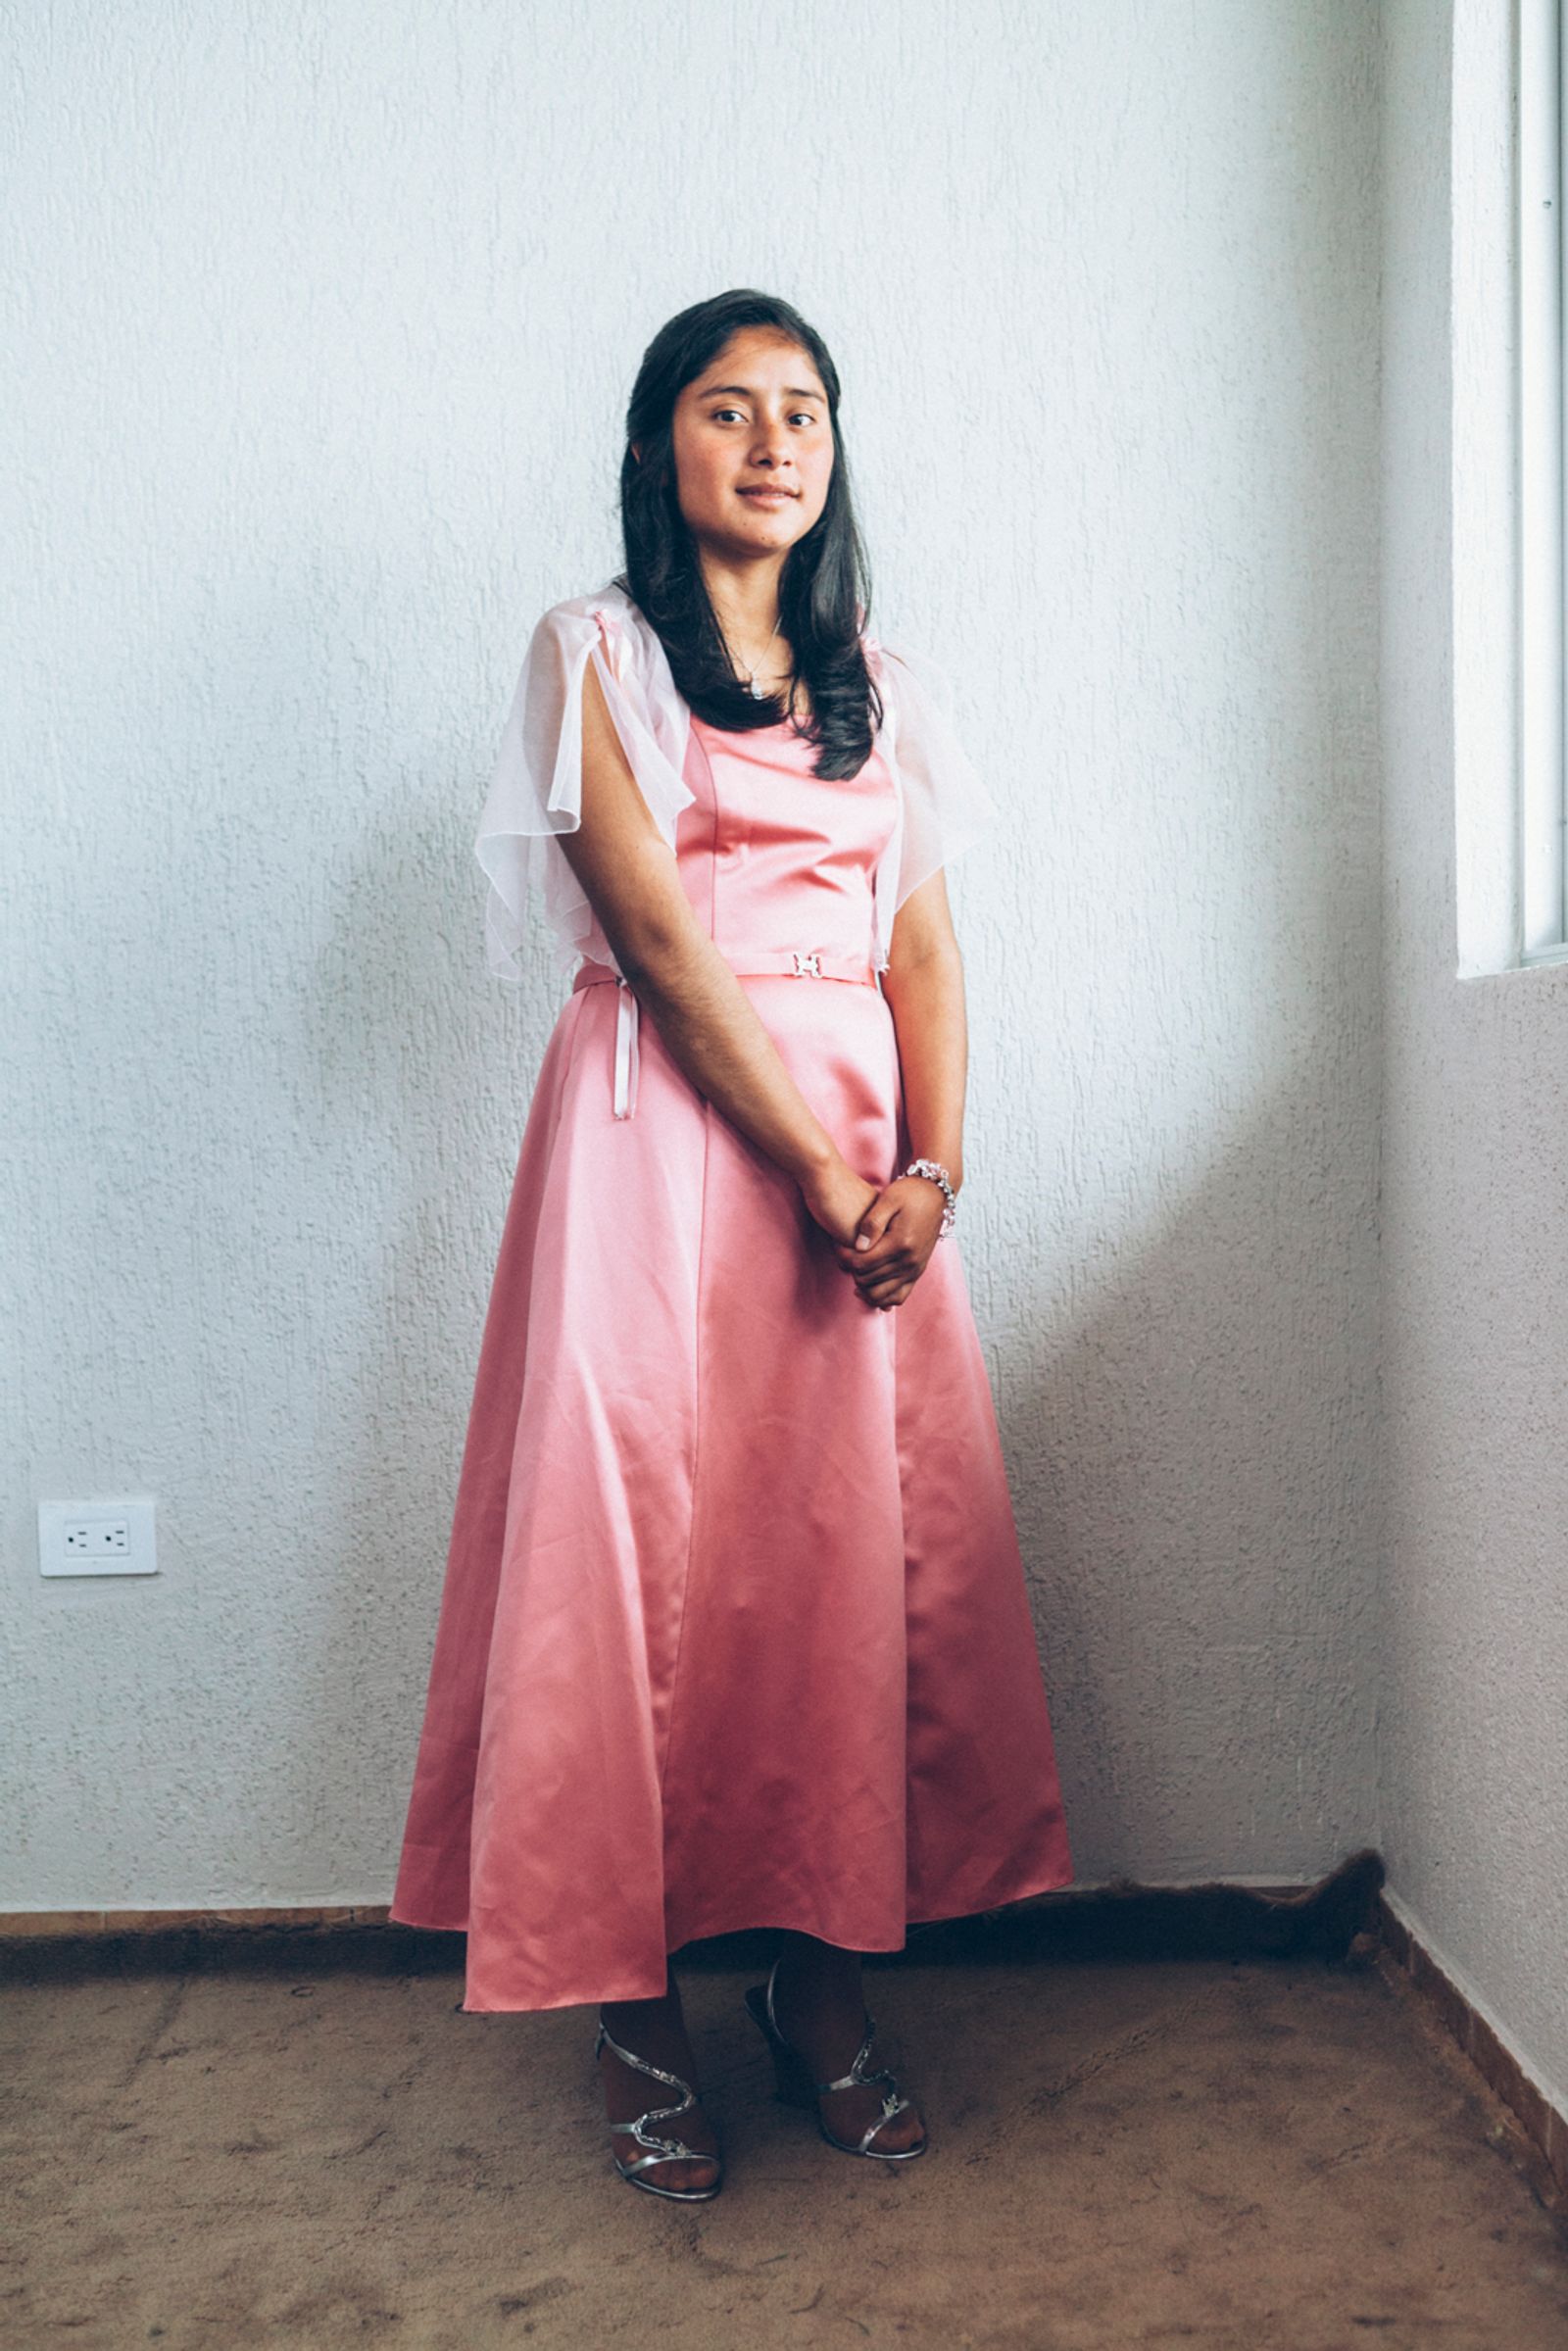 © Catalina Kulczar-Marin - Image from the Quinceañeras photography project